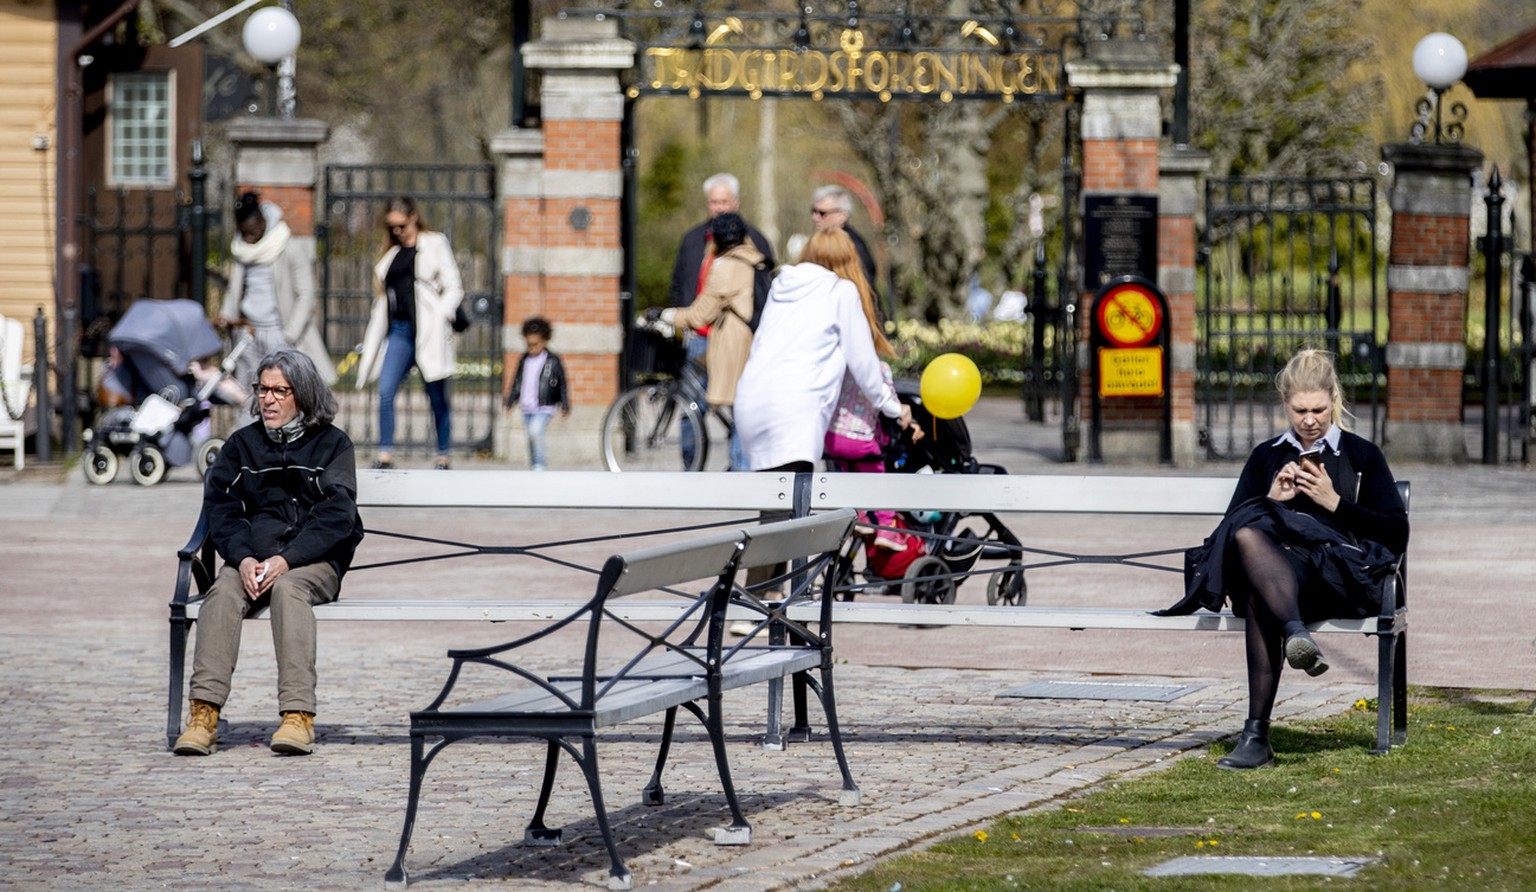 Social distancing outside the entrance to the city park &quot;Tradgardsforeningen&quot; in central Gothenburg, Sweden Friday April 24, 2020. The highly contagious CODIC-19 coronavirus has impacted on  ...